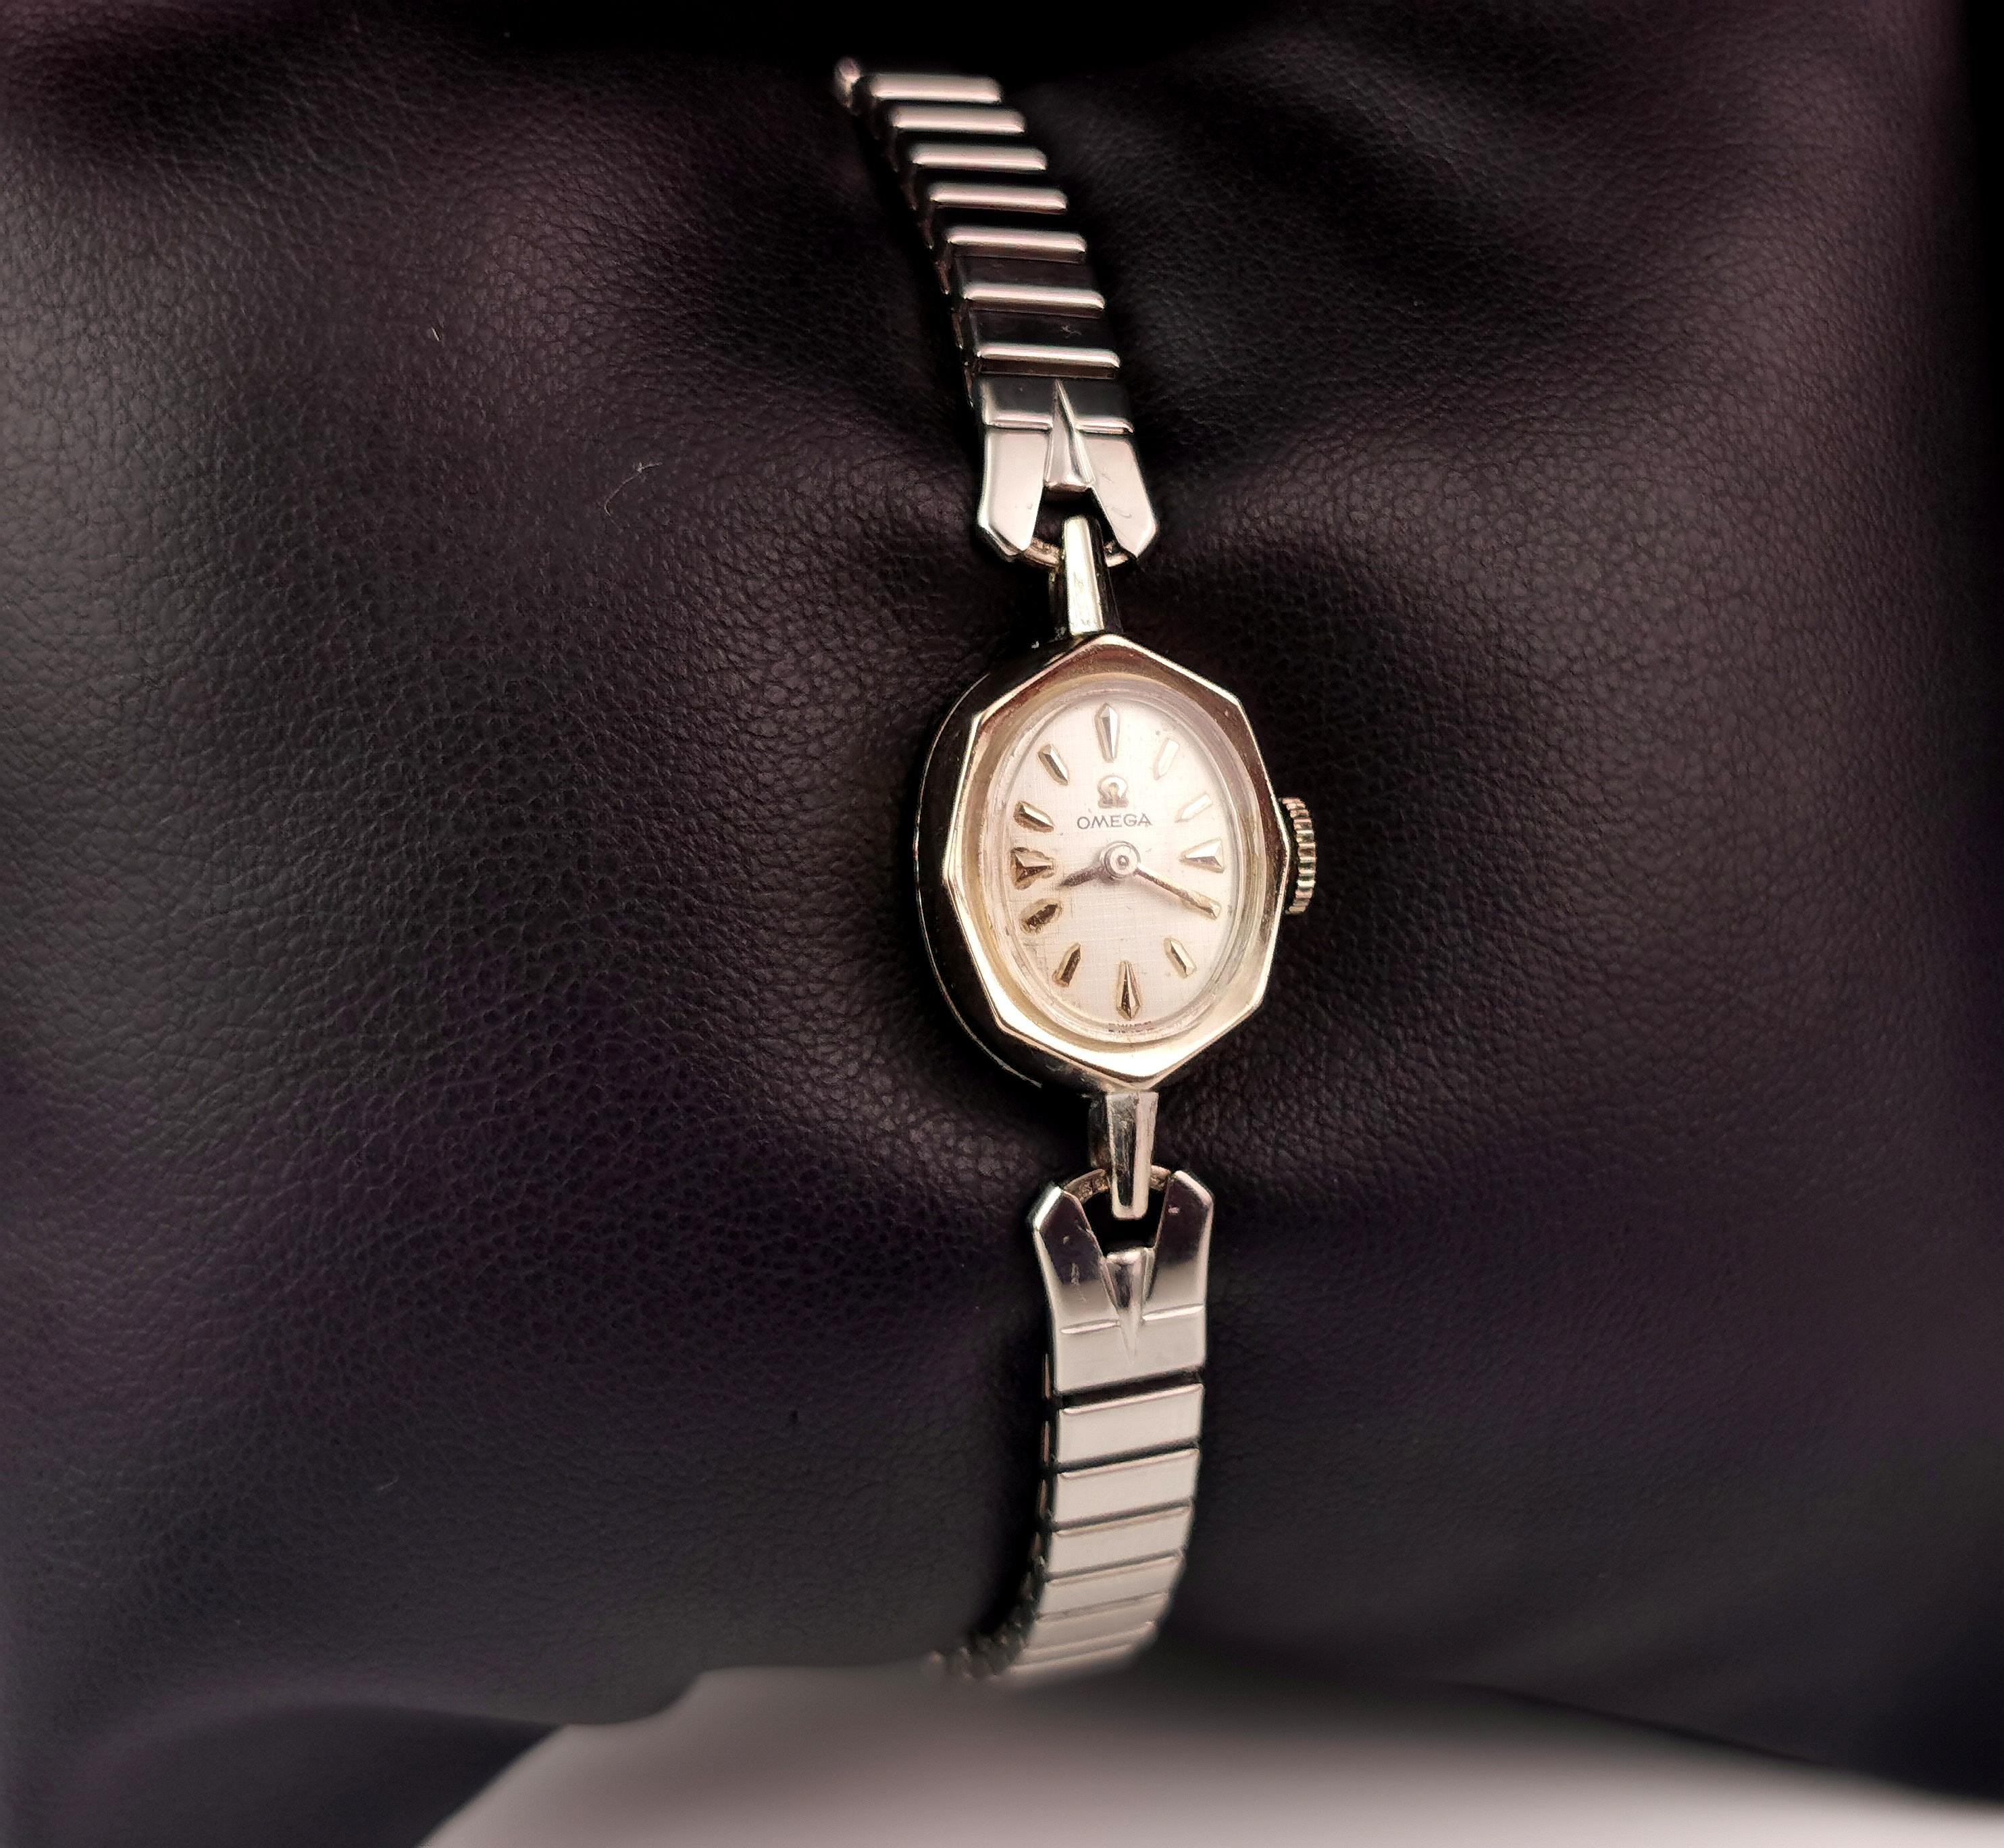 An attractive vintage ladies wristwatch by renowned manufacturer Omega.

It is a 14ct white gold plated watch with a silver tone dial, black numerals and hands and it is a manual wind wristwatch.

Marked to the dial for Omega.

It comes on a later